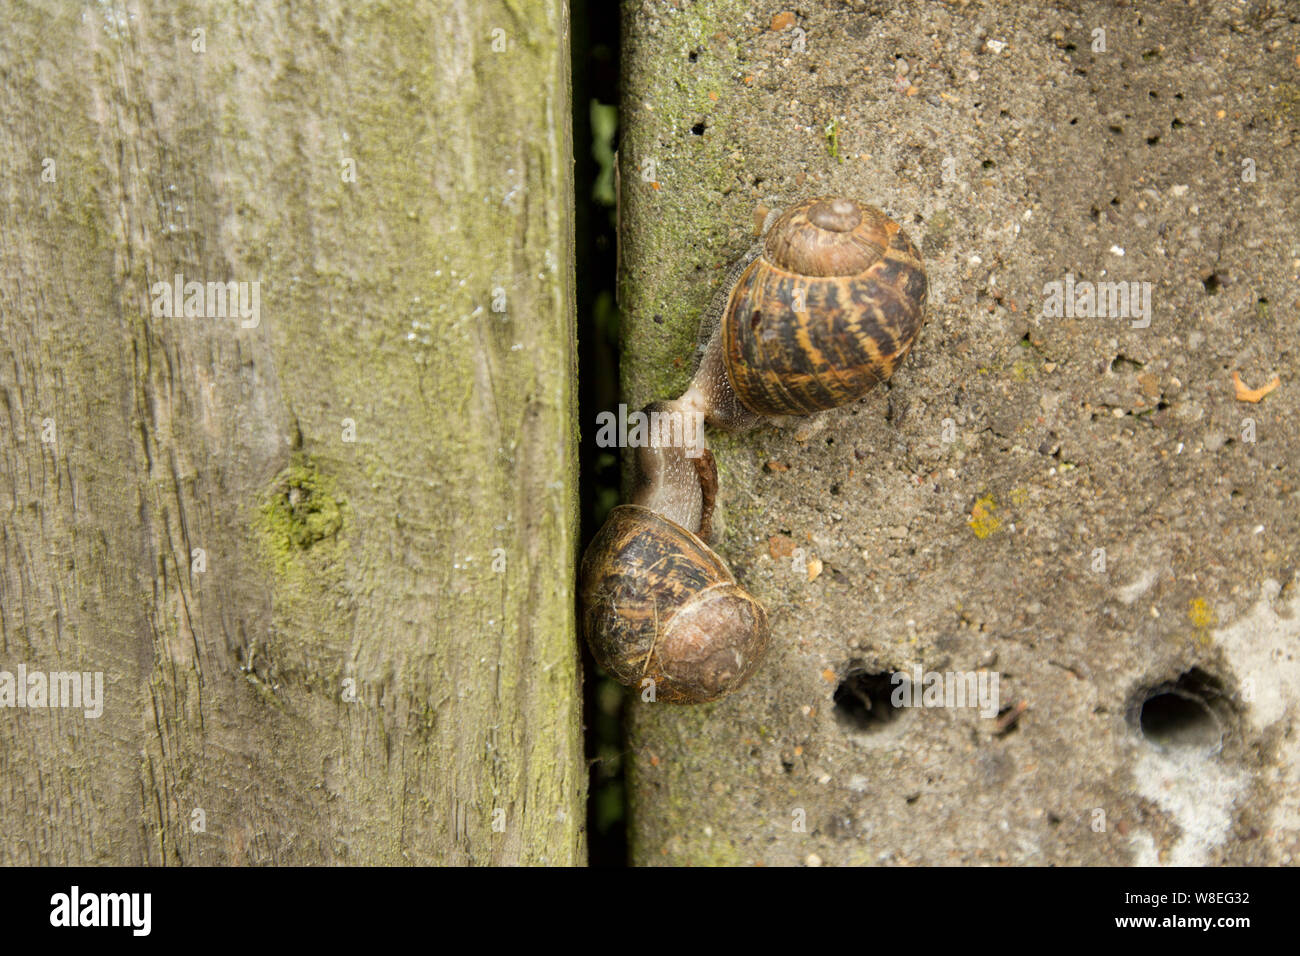 Two garden snails, Cornu aspersum, mating on a stone fence next to a road. North Dorset England UK GB. Stock Photo